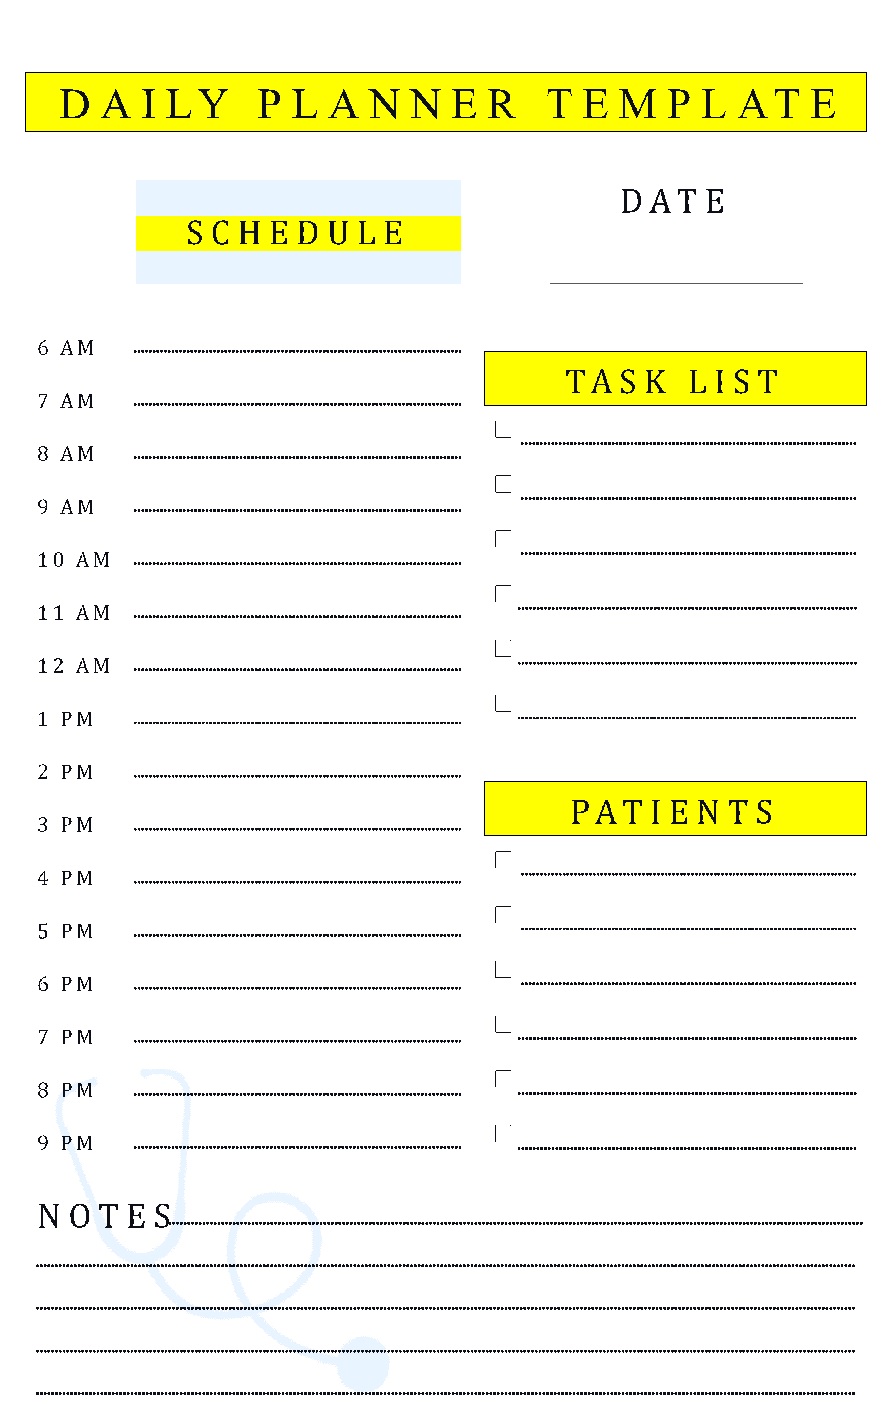 daily-planner-excel-template